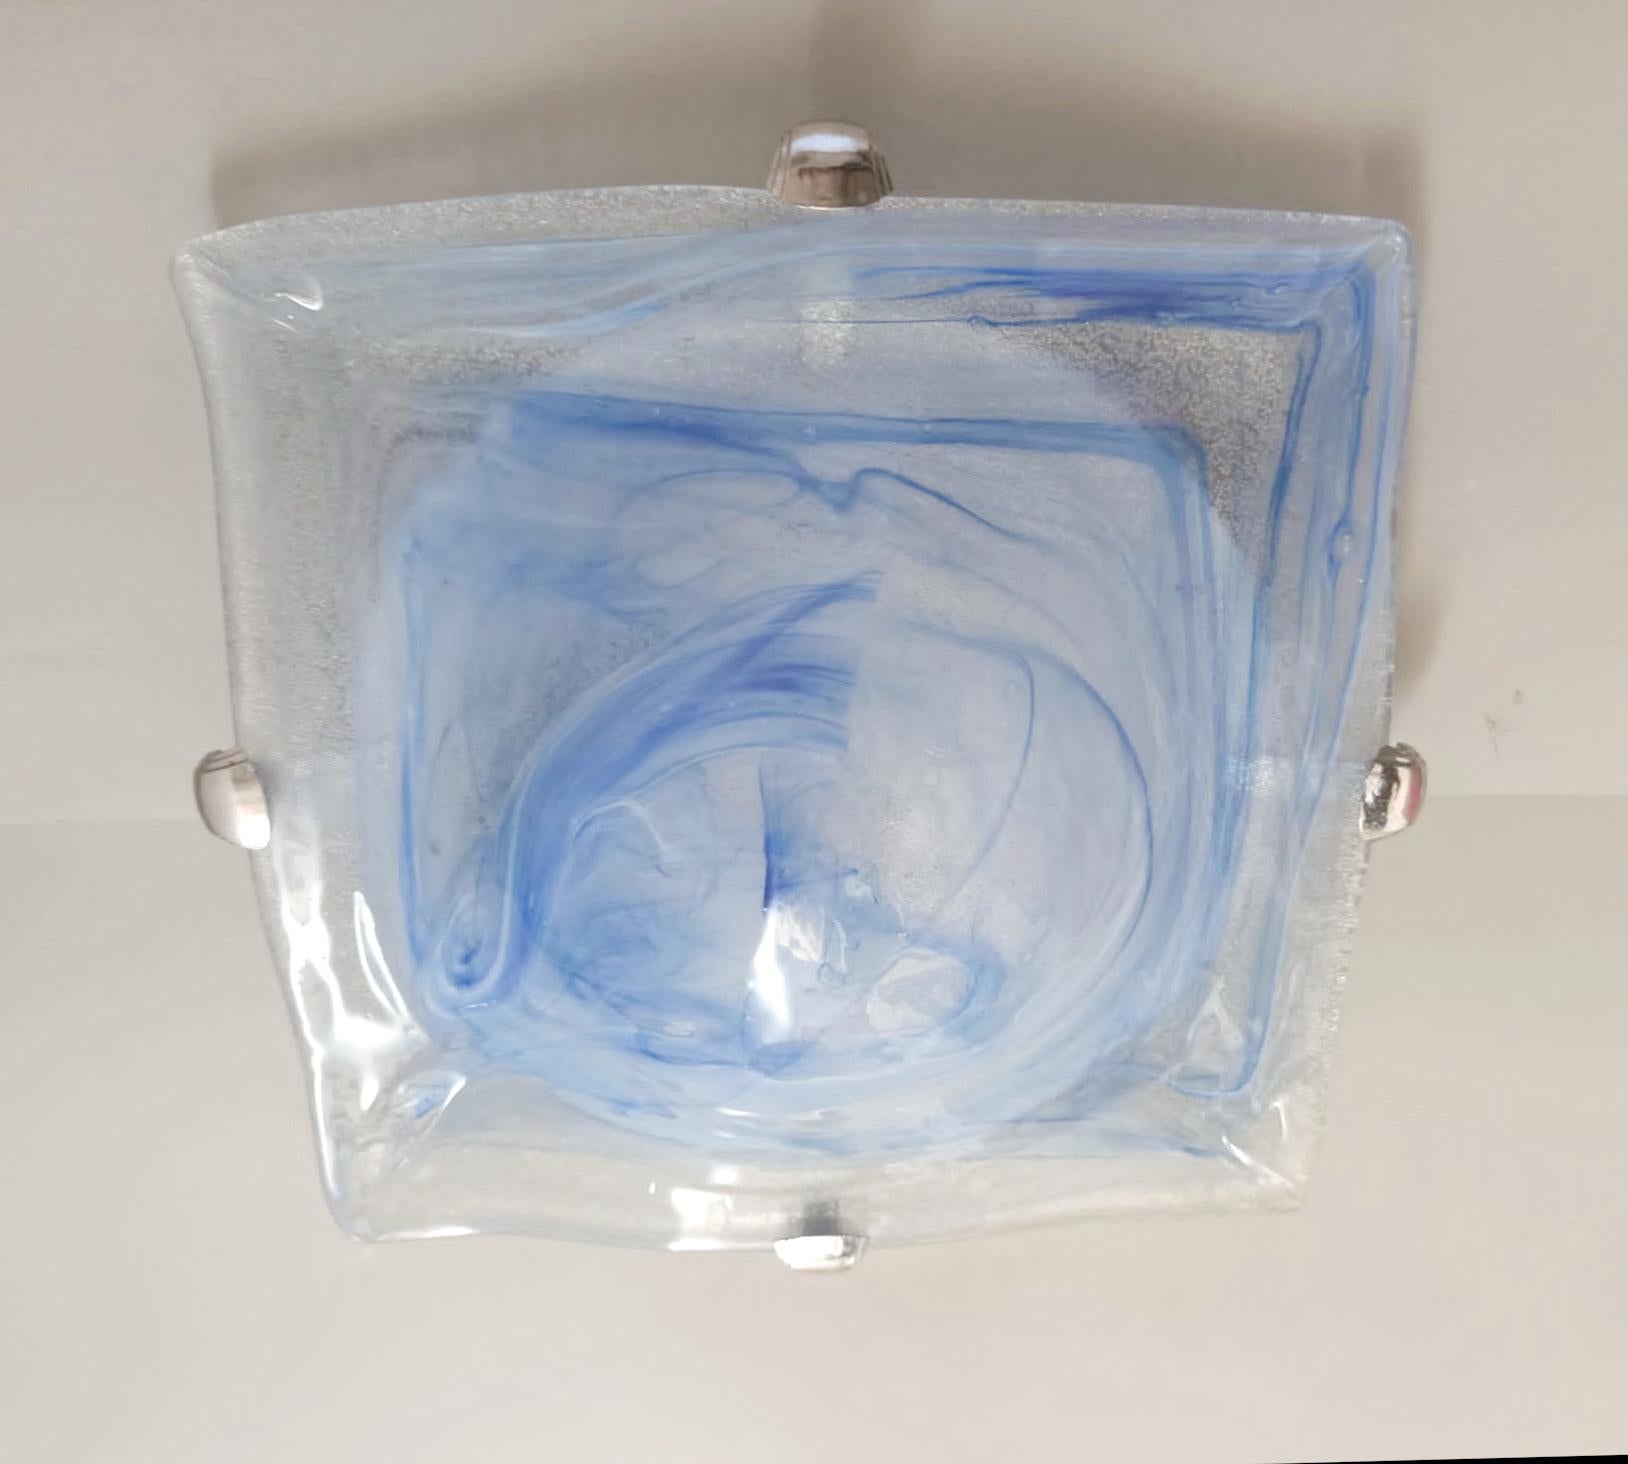 Vintage Italian flush mount or wall light with a single square graniglia Murano glass shade and blue decoration / Made in Italy in the style of Mazzega, circa 1960s
Measures: width 12 inches, length 12 inches, height 3.5 inches
1 light / E26 or E27